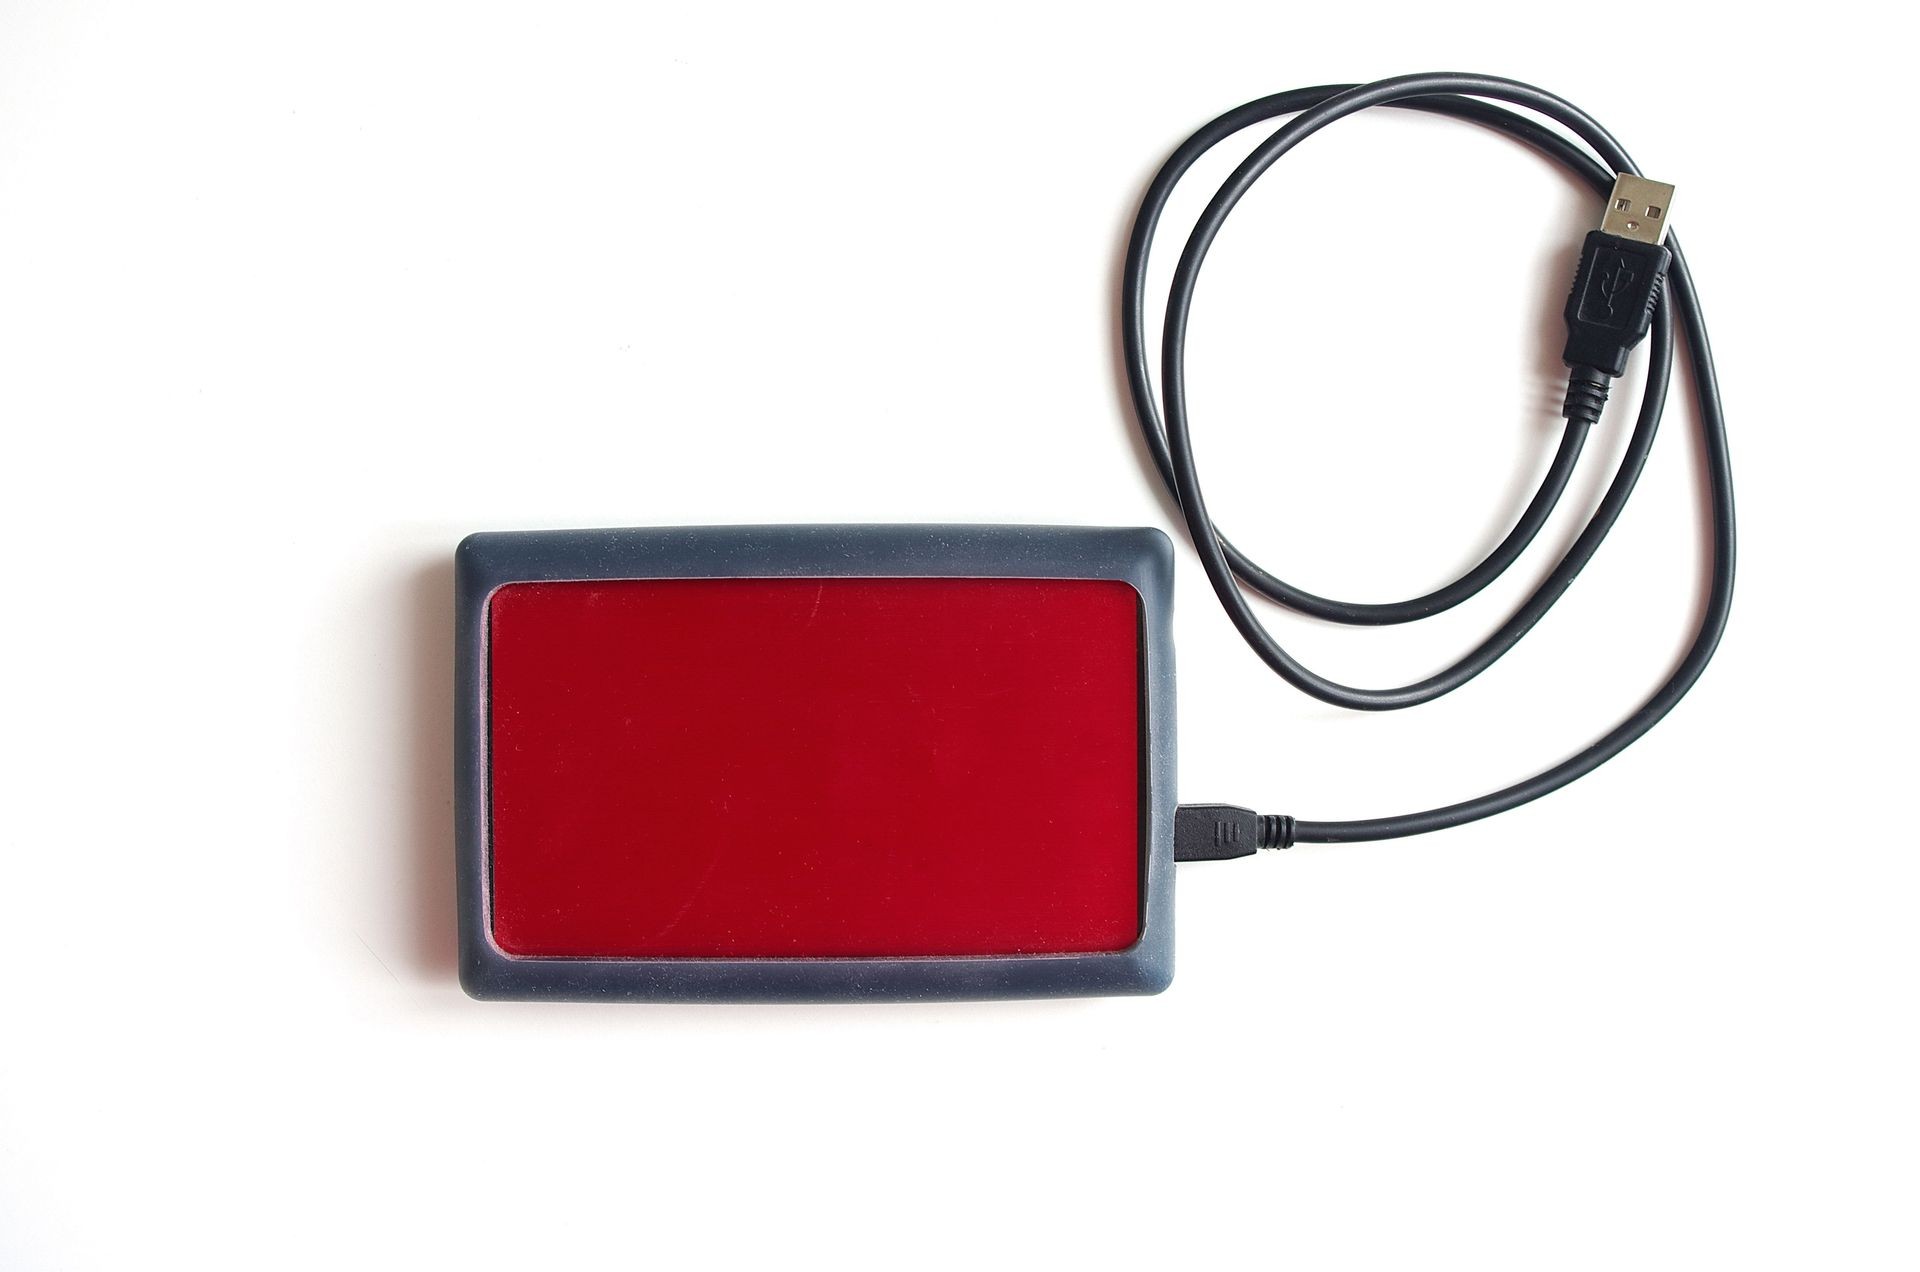 Red external hard drive with usb cable.